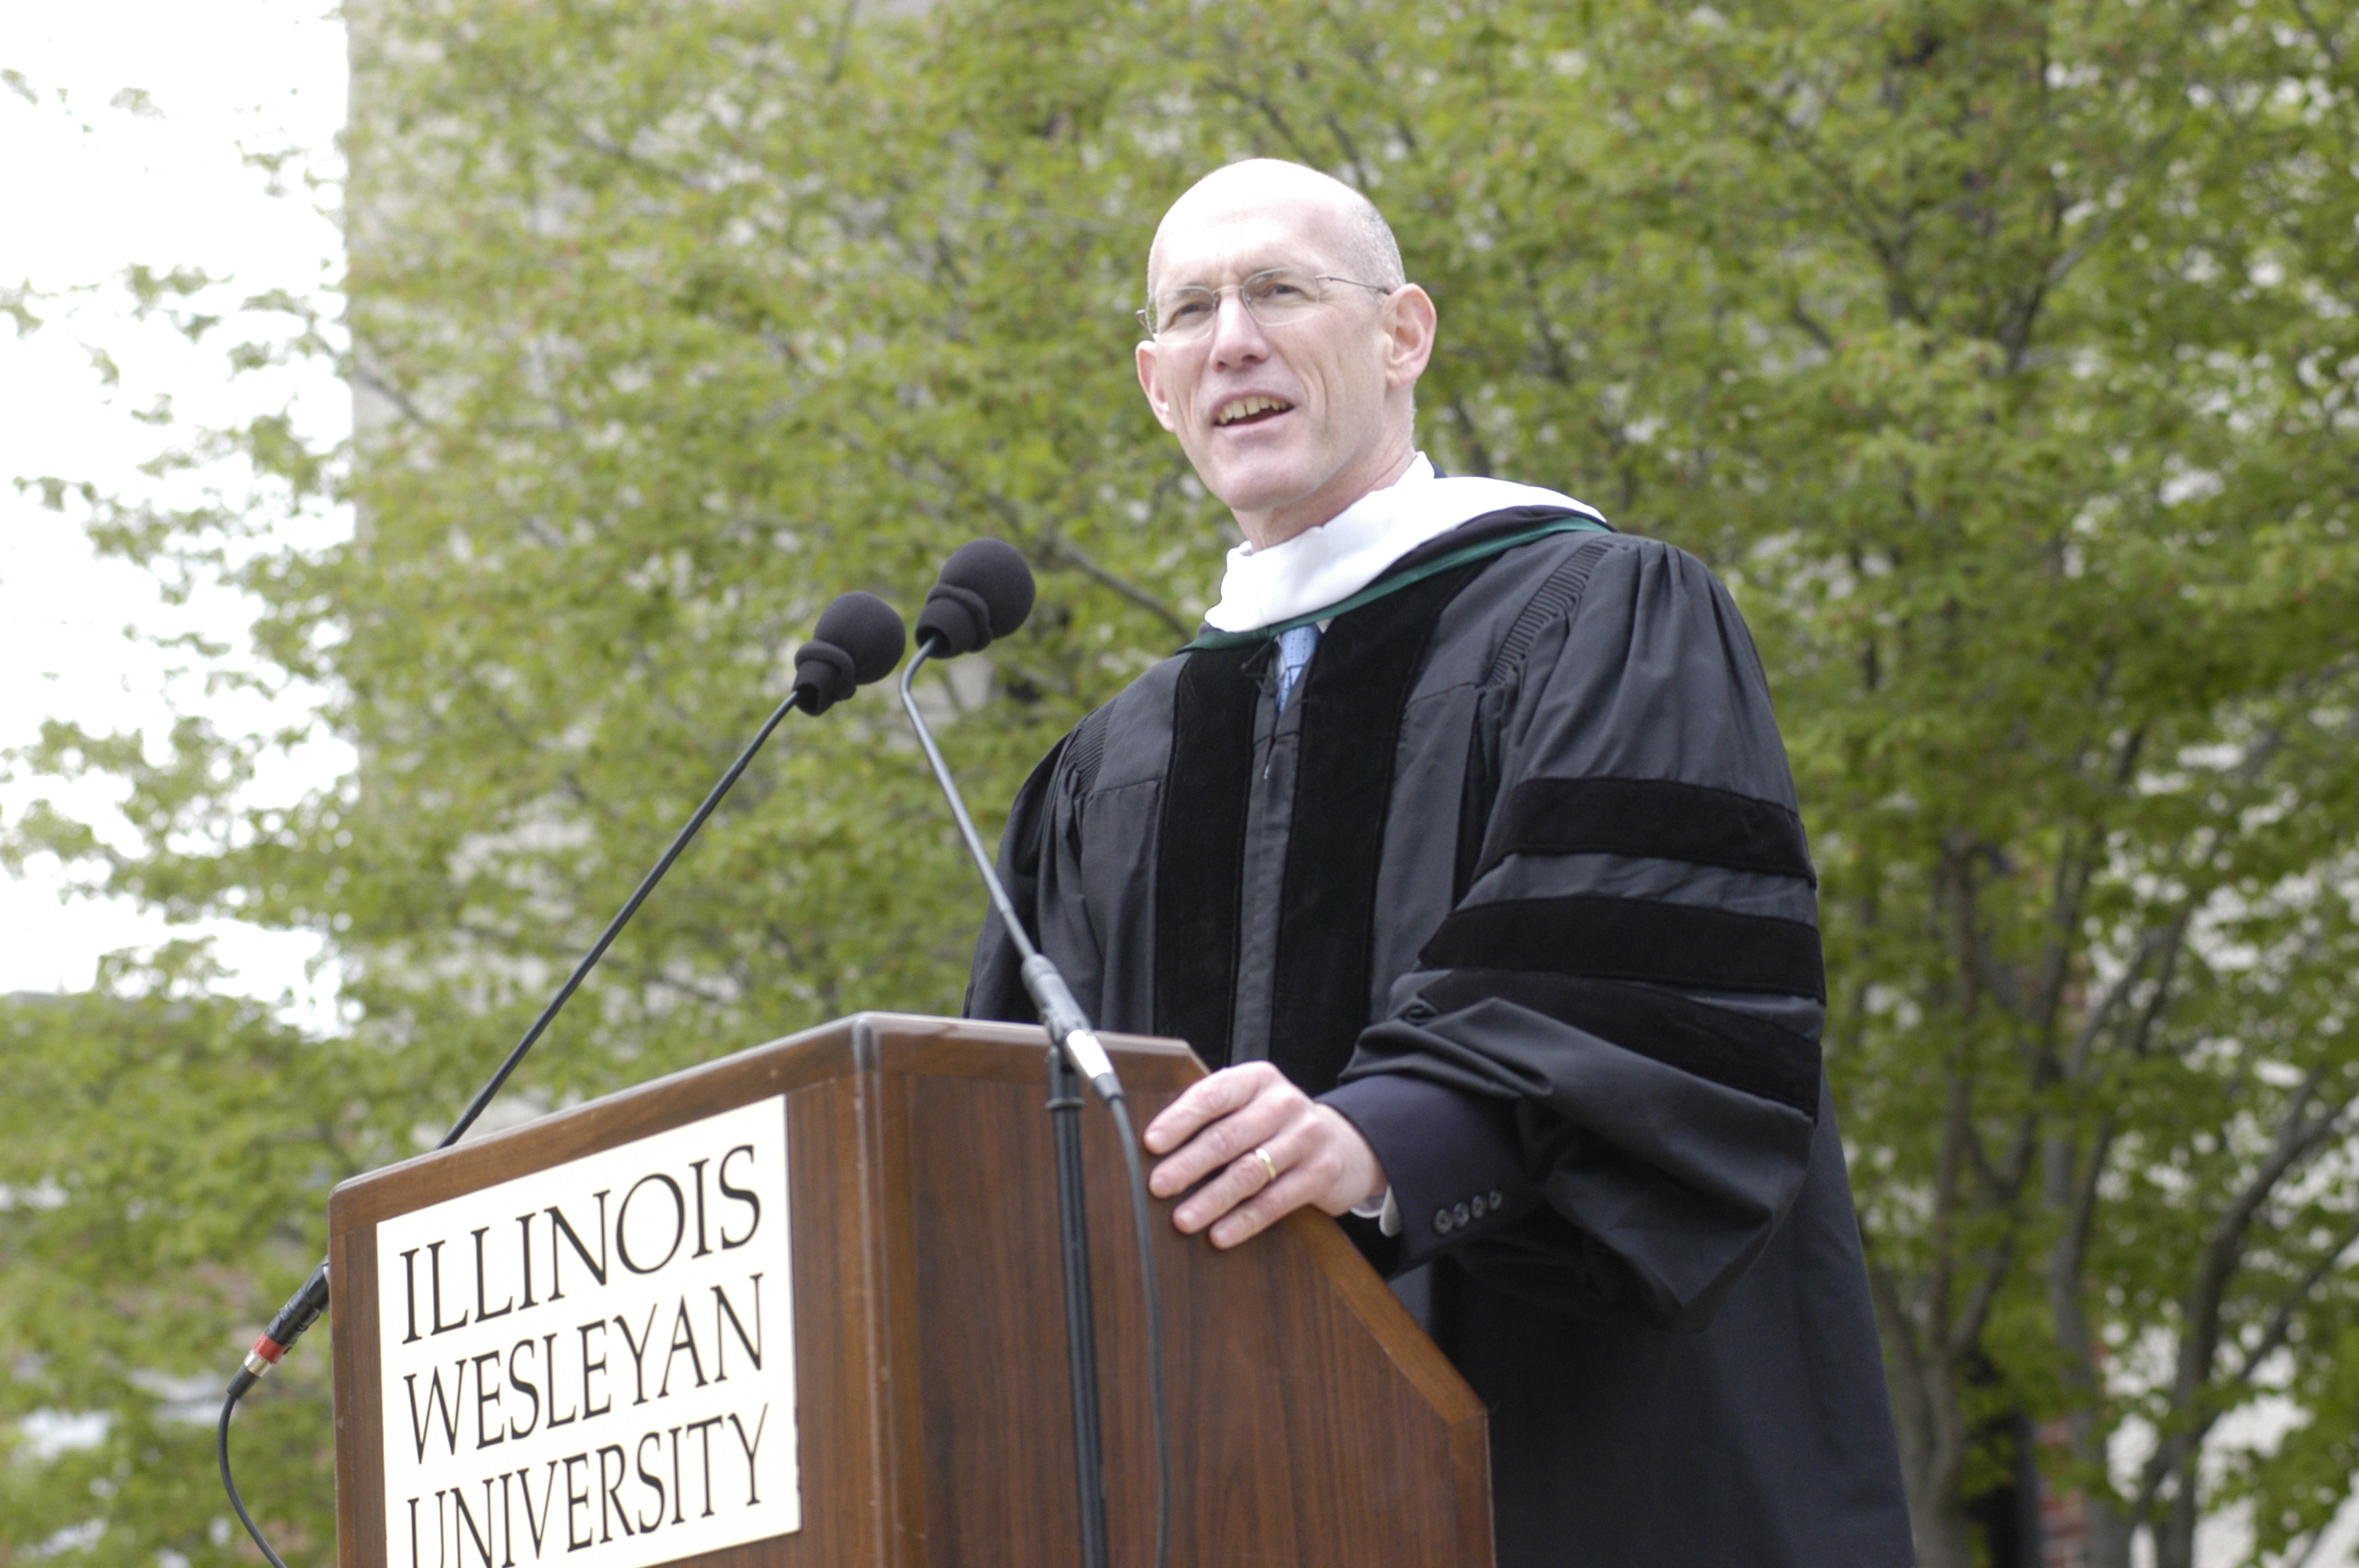 Poland provided the keynote address at Illinois Wesleyan’s Commencement ceremony in 2005.